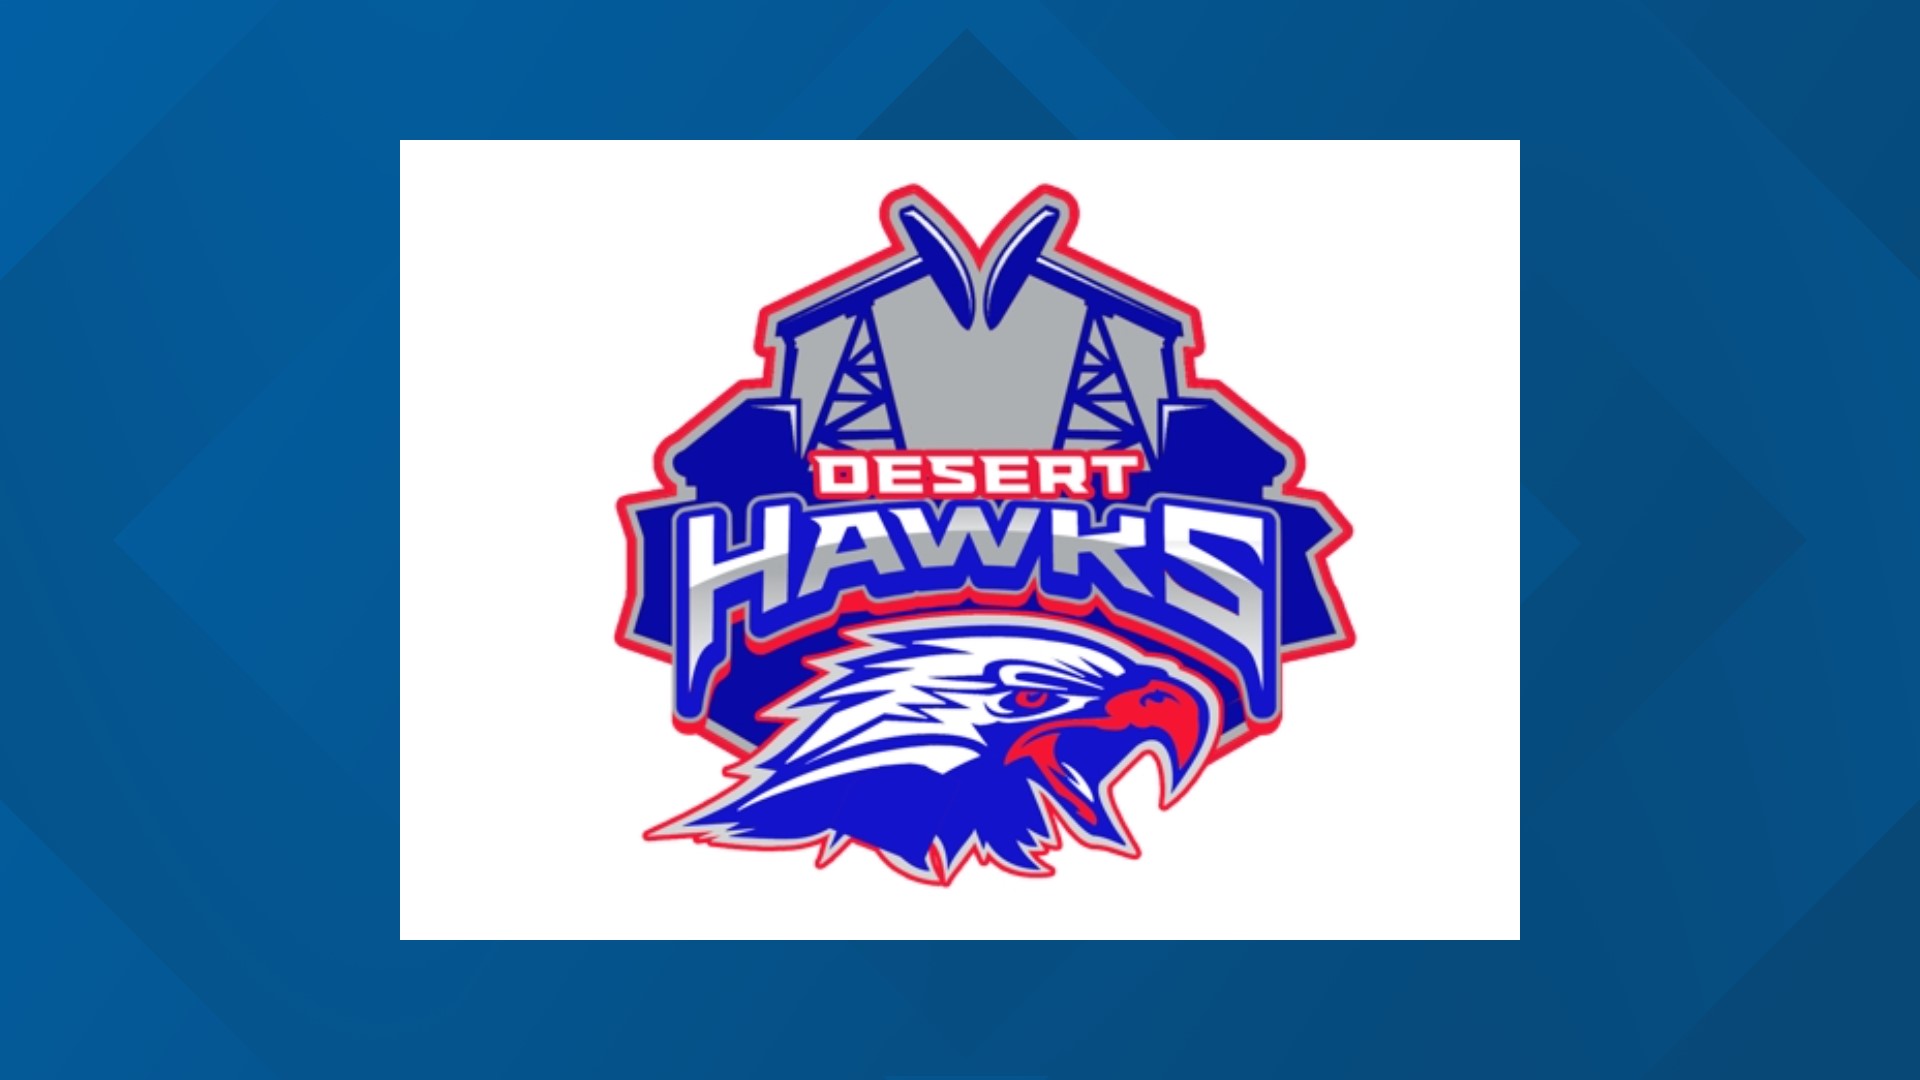 Formerly the Warbirds, the Desert Hawks join the AFL after playing in the NAL in 2023 and the AFA in 2021 and 2022, winning the title in 2021.